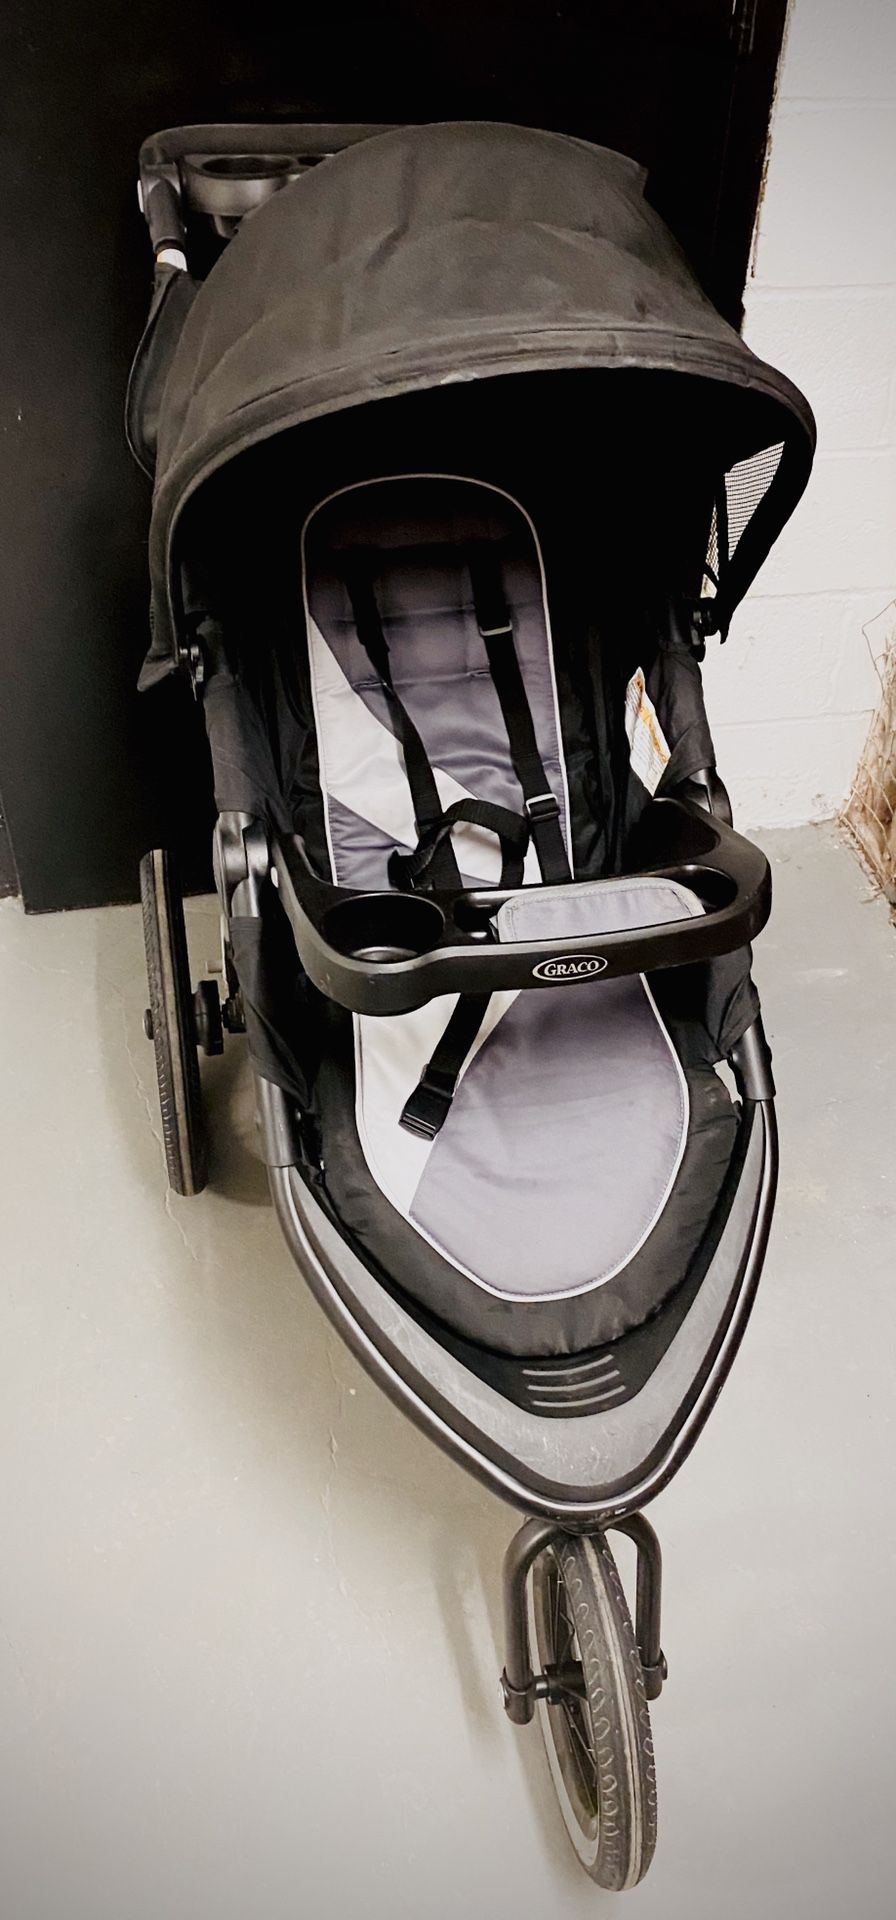 Graco Fast Action Jogger Stroller. In good condition and very little usage. Lots of storage all parts included with user manual. Retail price is anyw